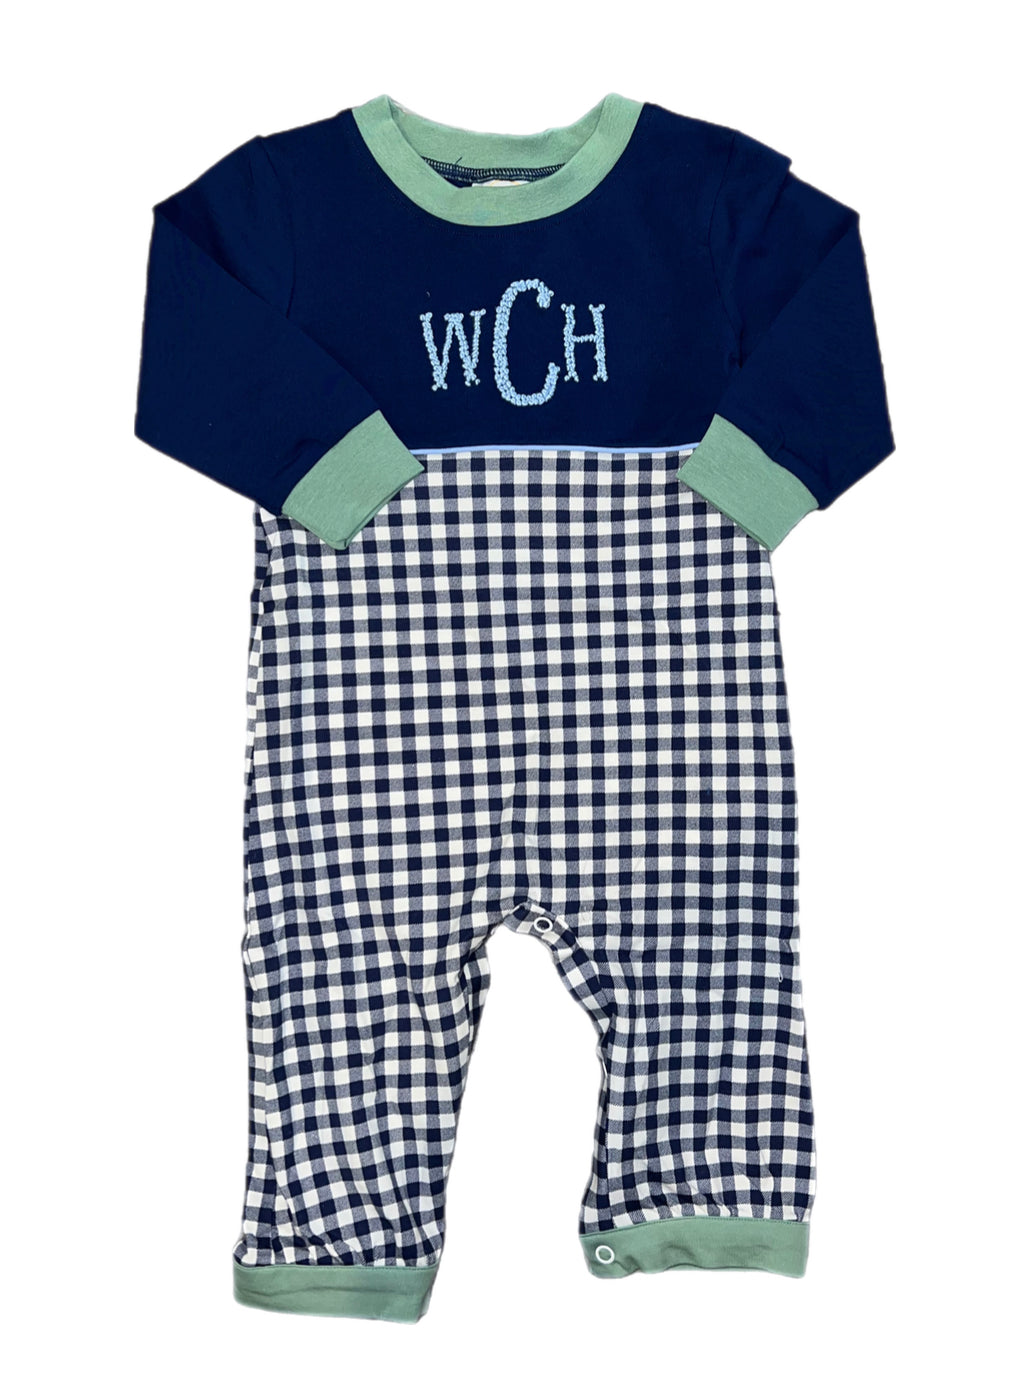 RTS: SBSC- Boys Only Collection- Winter Colorblock- Boys Knit Romper “WCH”